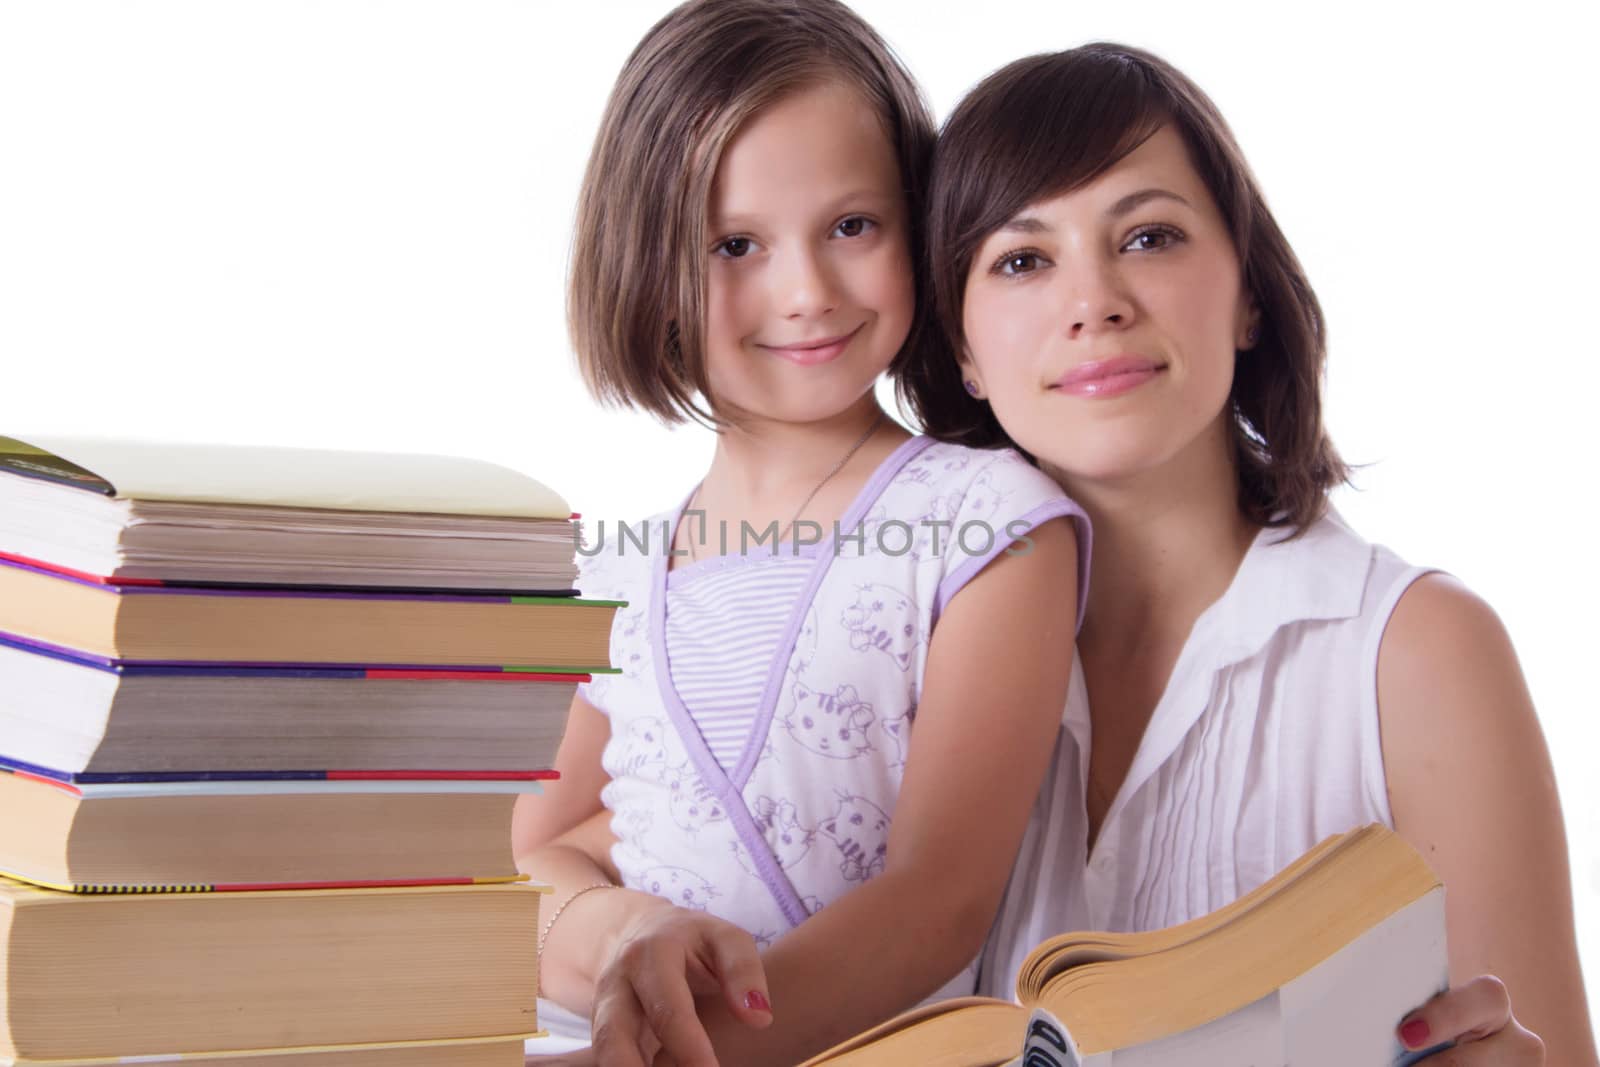 Mother and daughter reading books together by Angel_a